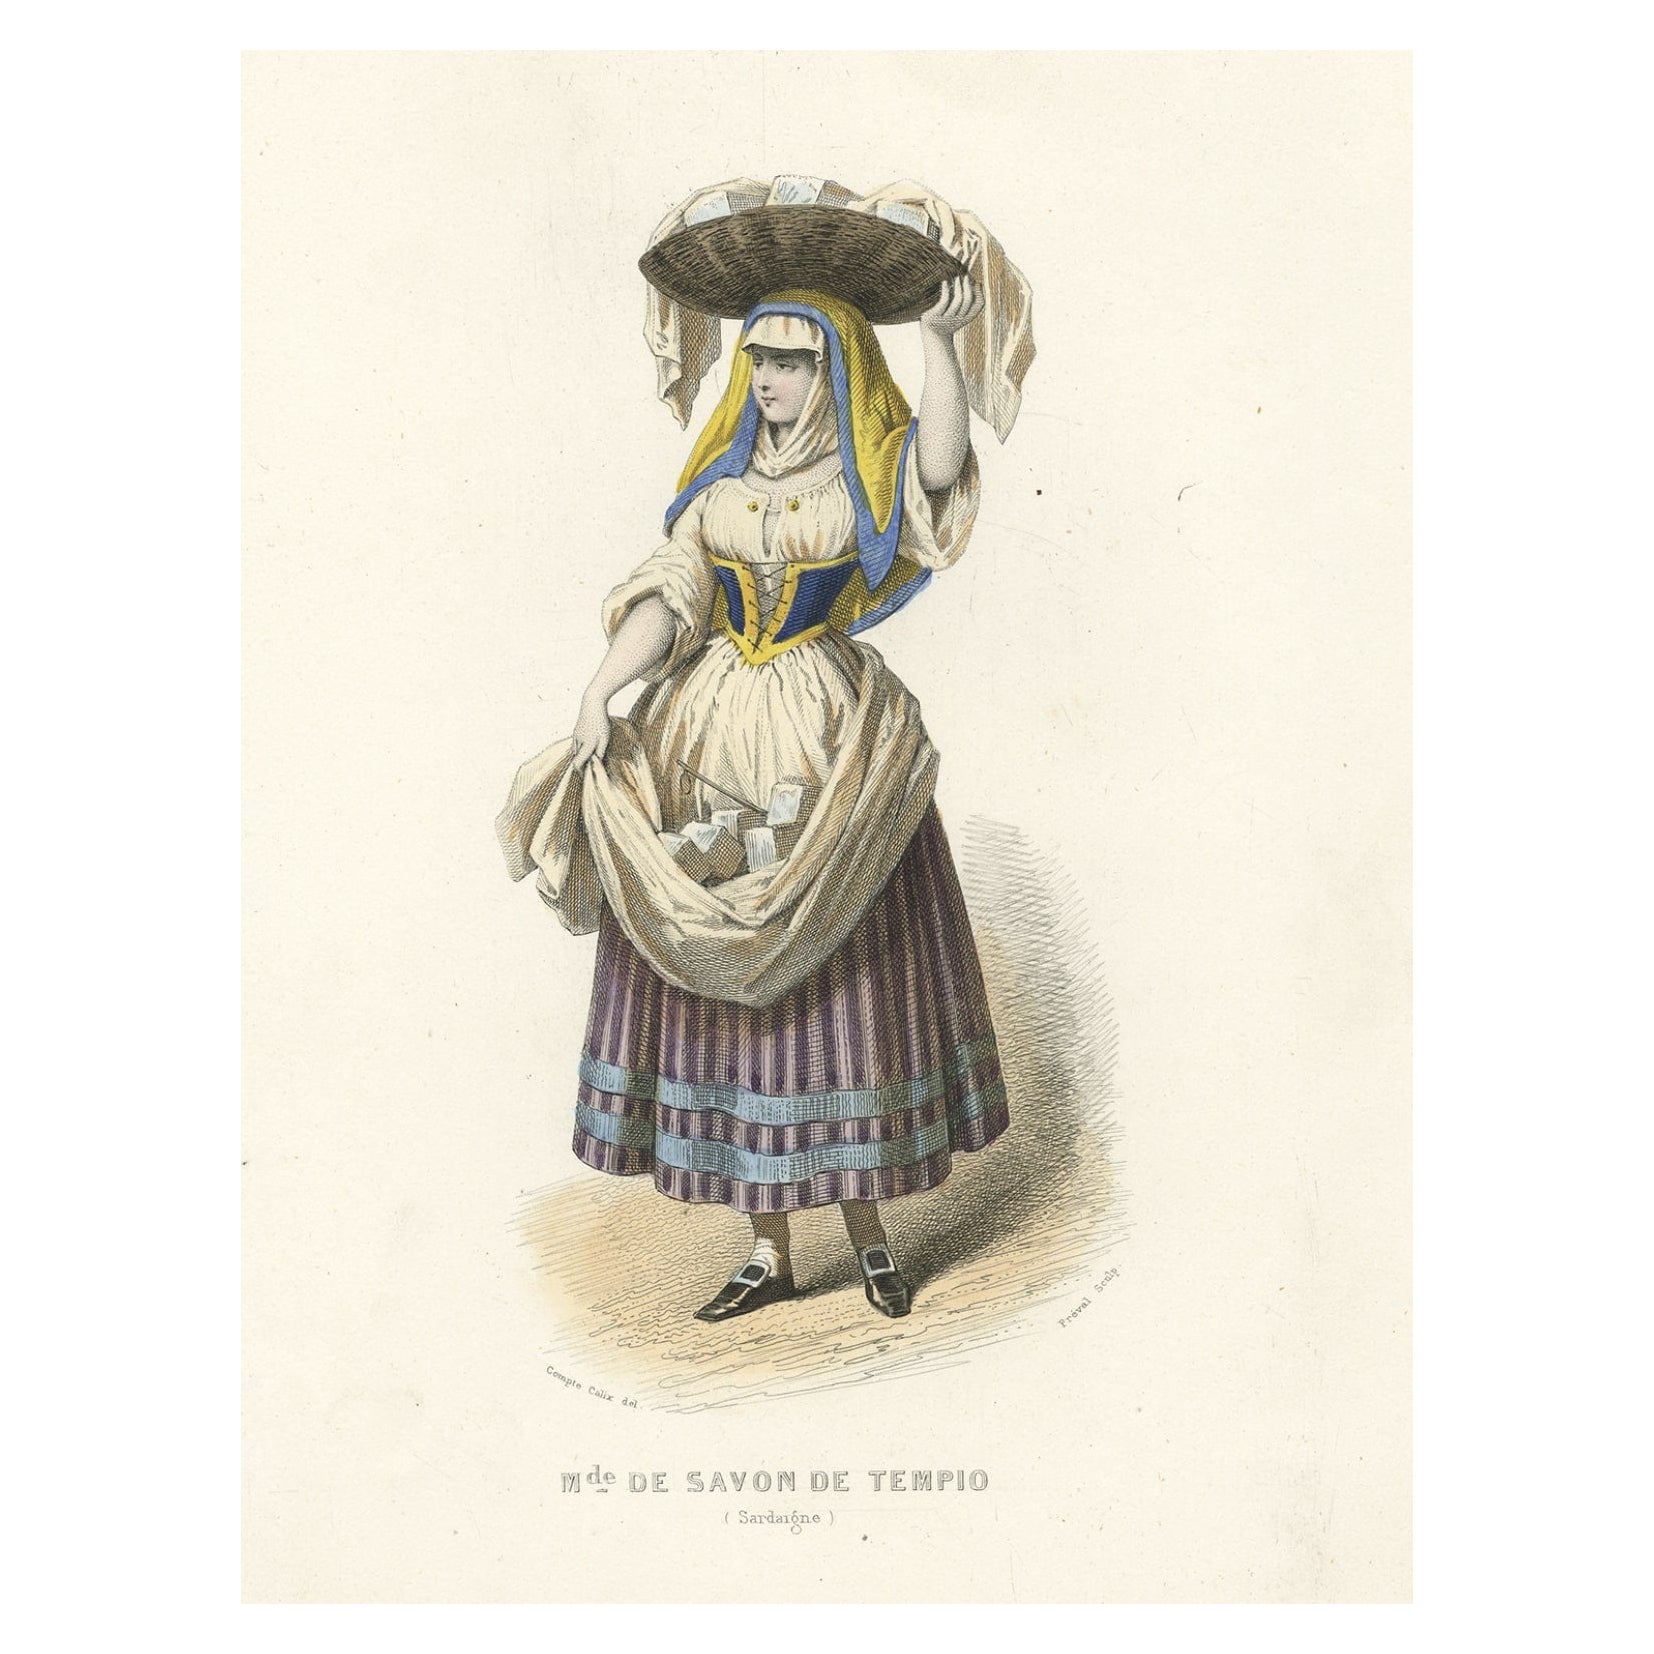 Antique Print of a Lady Selling Soap in Tempio, Sardinia, Italy, 1850